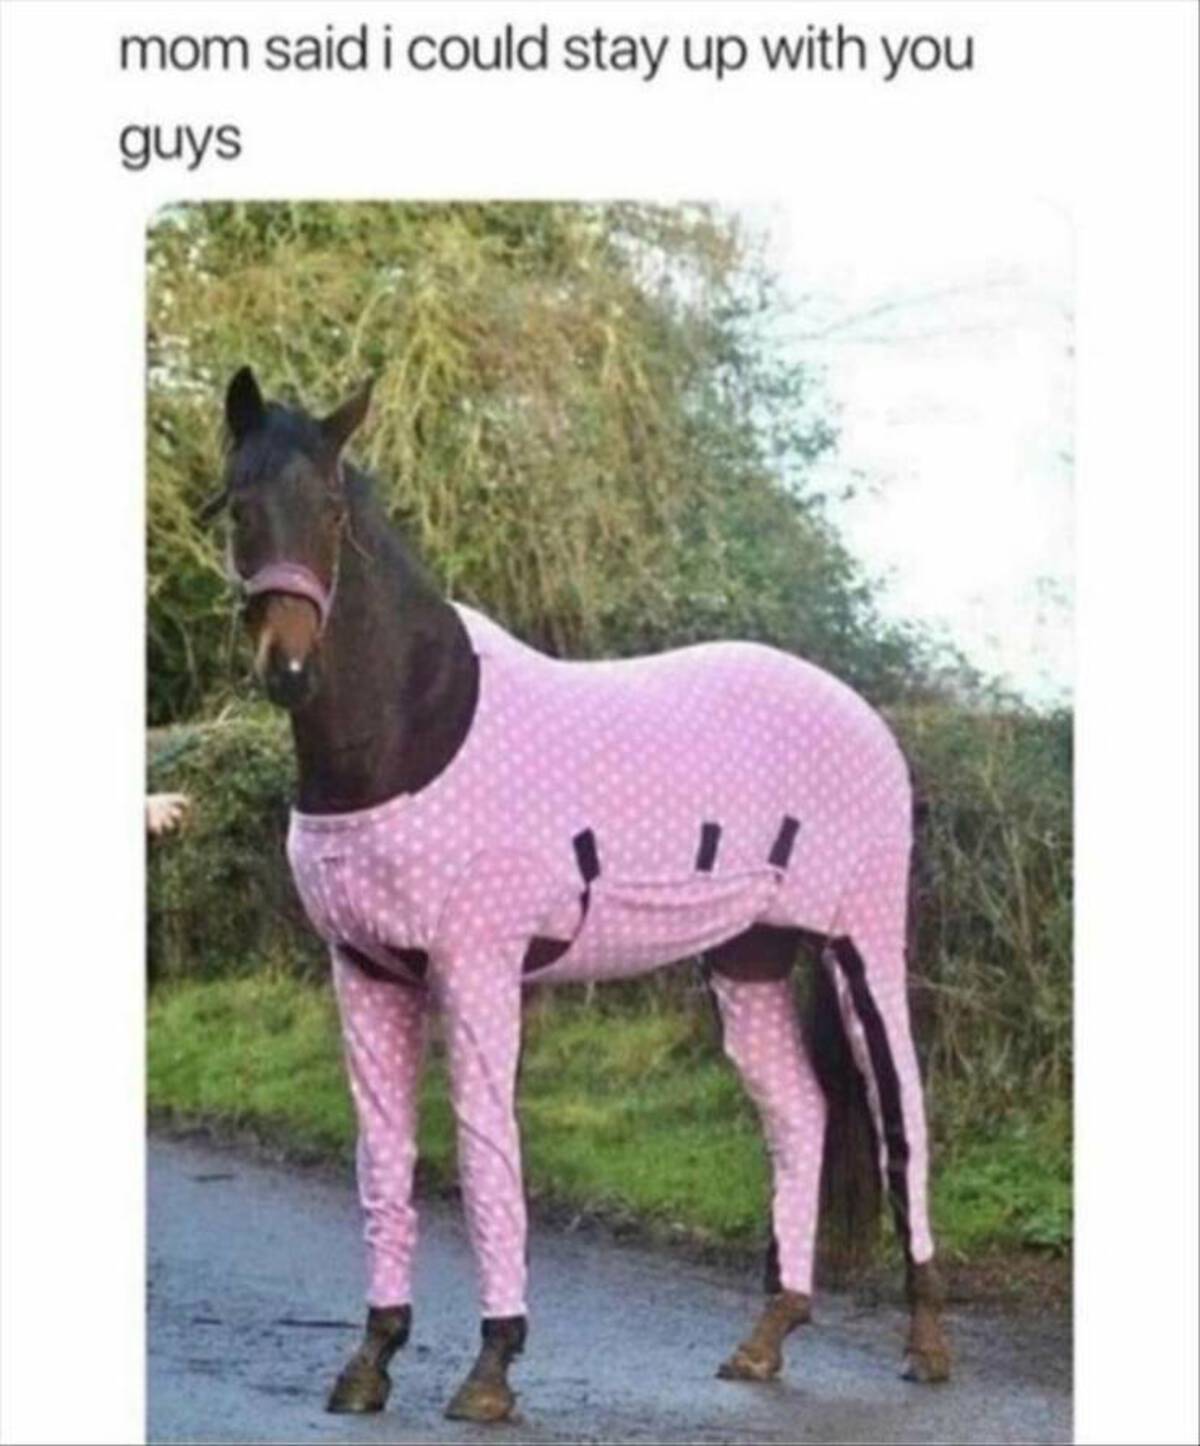 horse wearing pajamas - mom said i could stay up with you guys